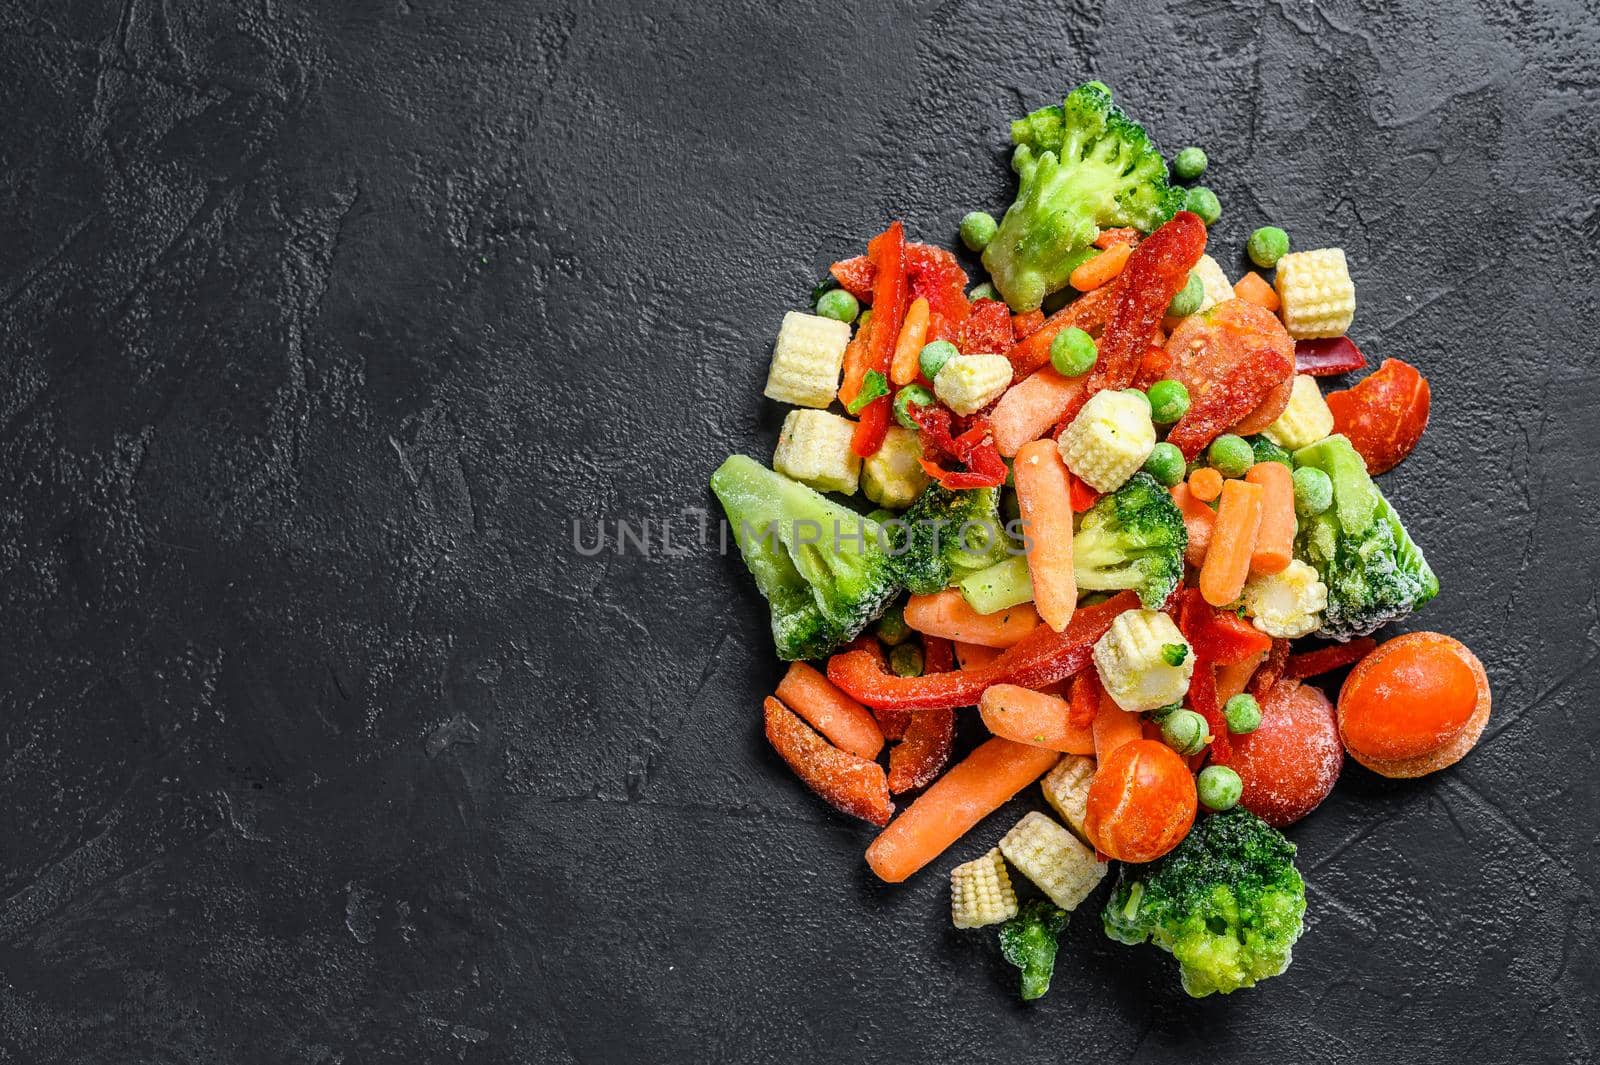 Frozen cold sliced Vegetables, broccoli, sweet peppers, tomatoes, carrots, peas and corn. Black background. top view. Copy space.